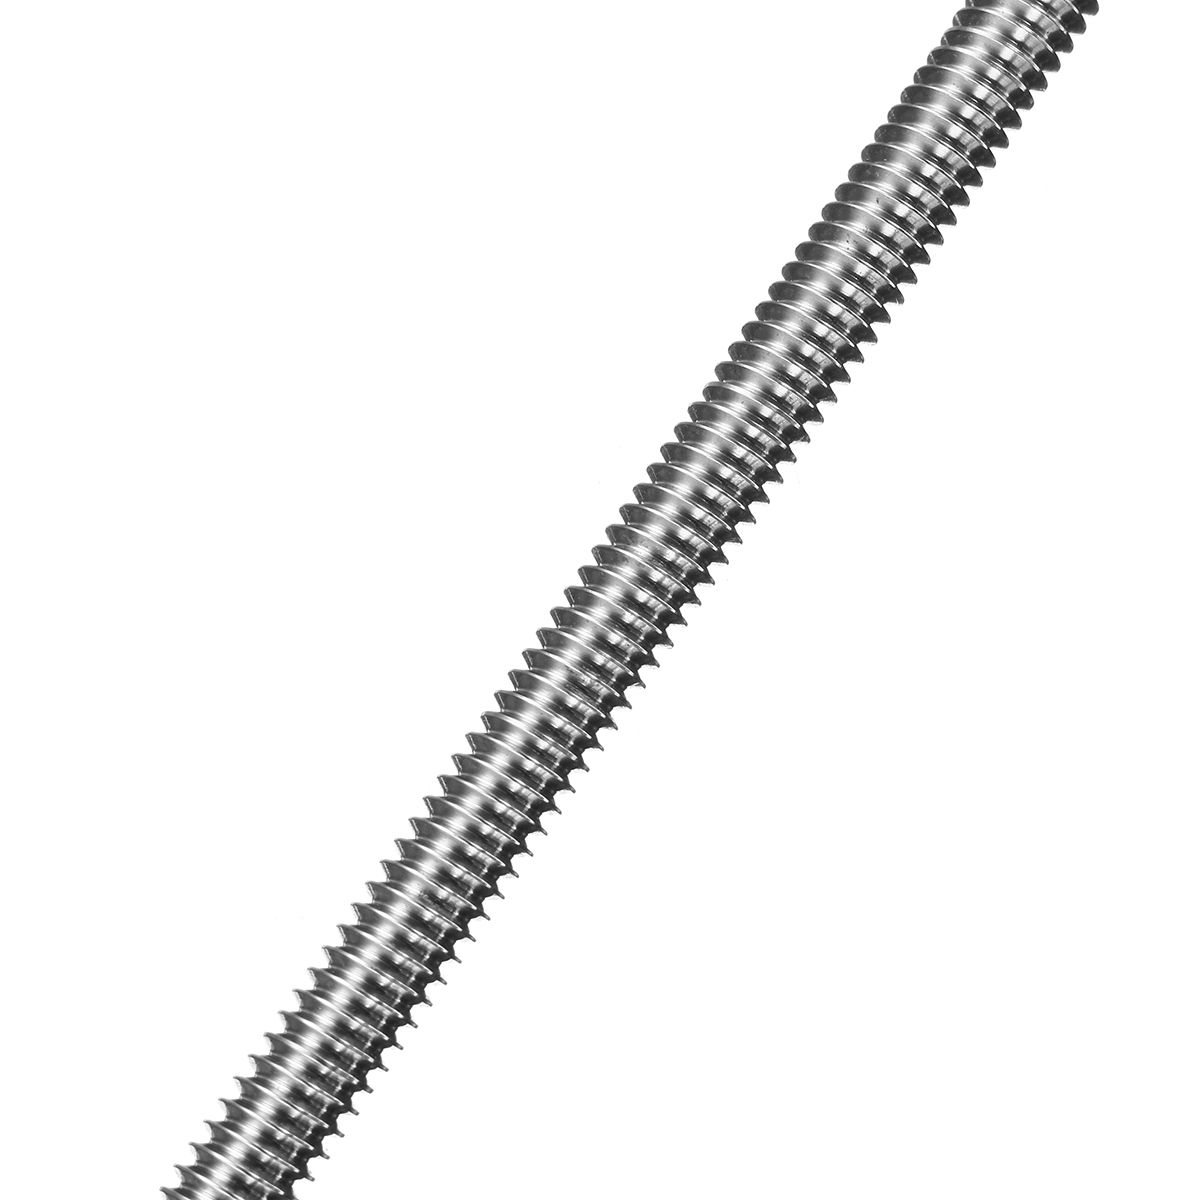 10quot-Long-Threaded-End-Fitting-Swage-Stud-Rigging-Terminals-for-18quot-Cable-Railing-Rail-1310903